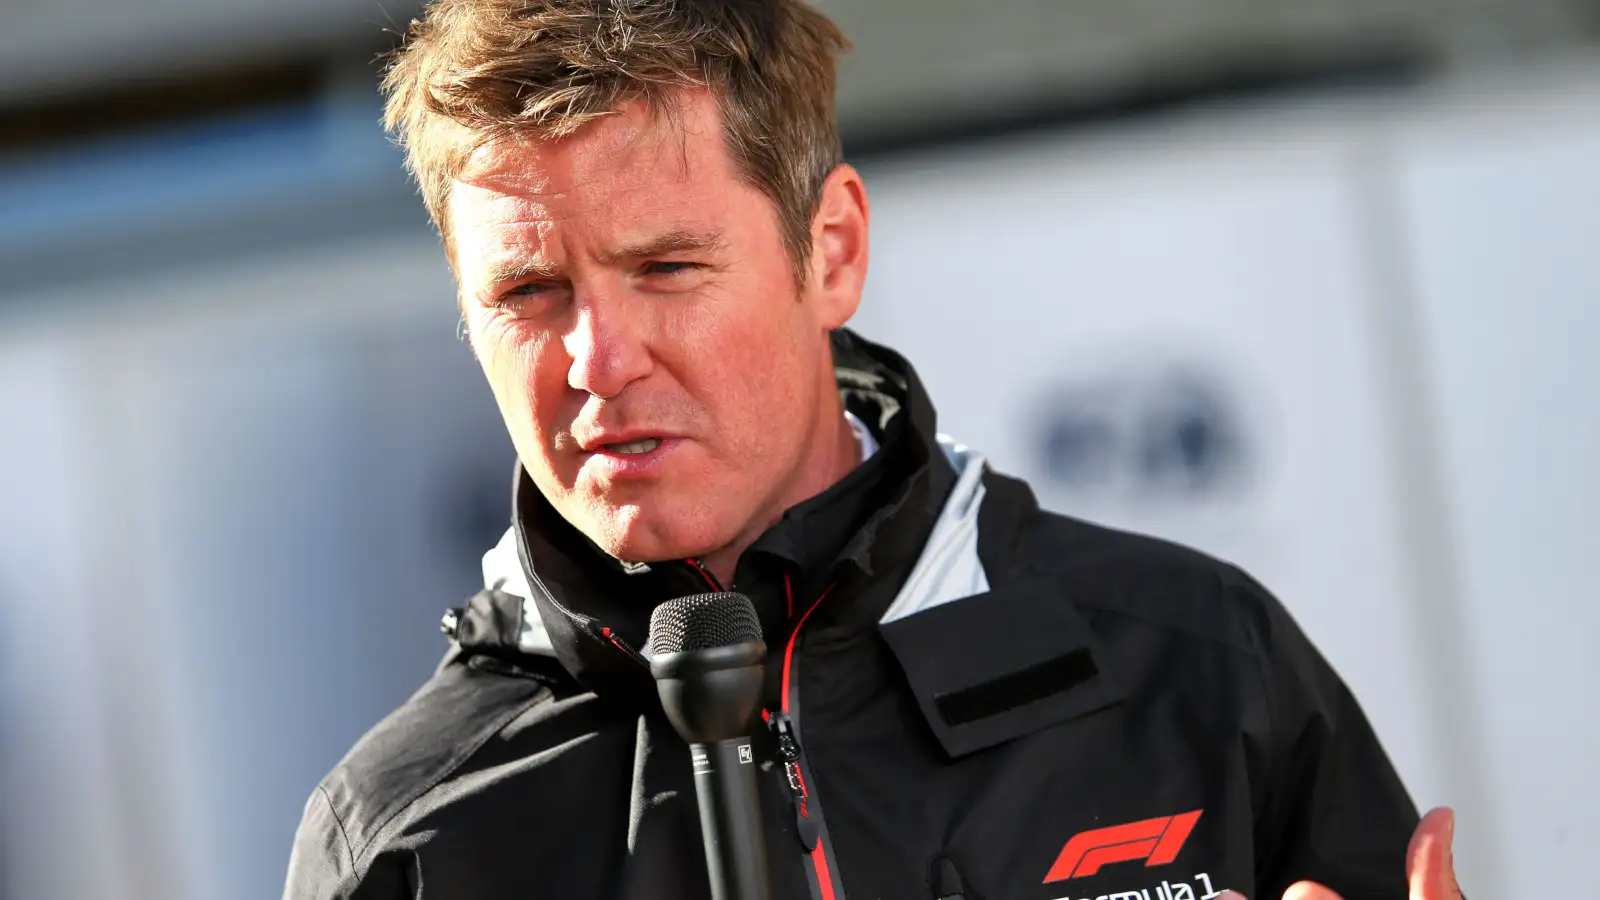 Rob Smedley F1 Expert Technical Consultant. United States November 2019